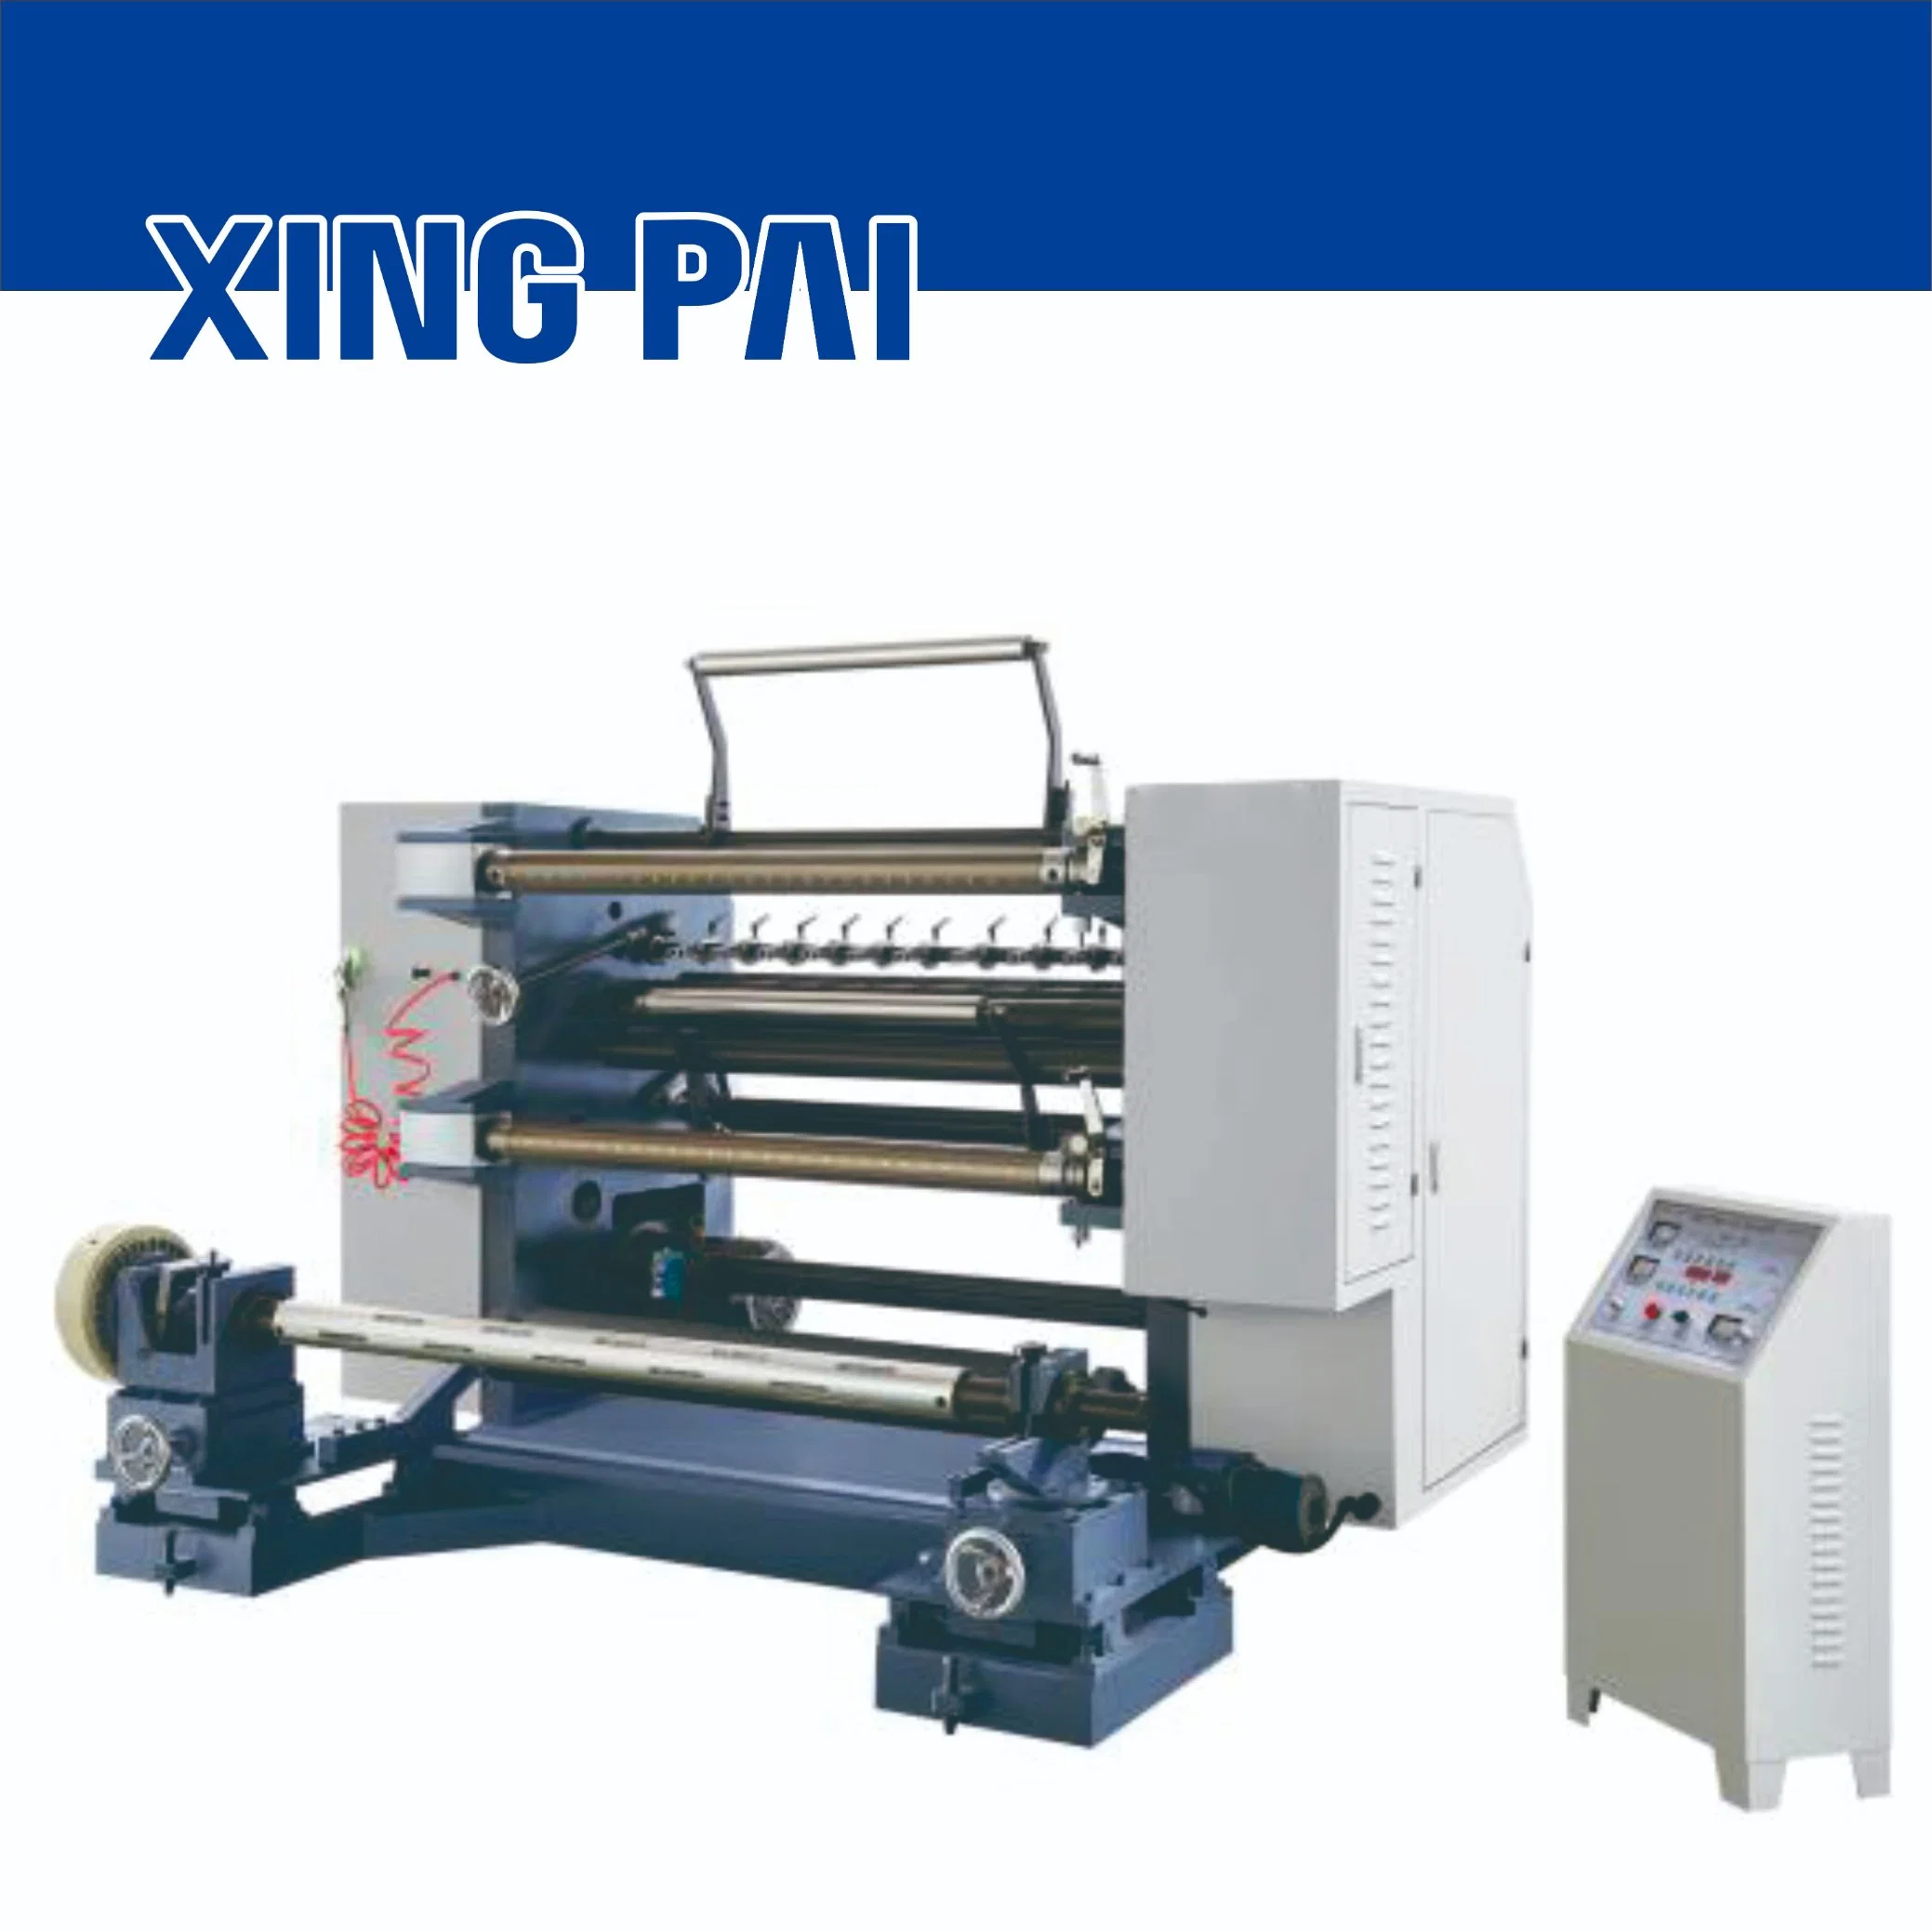 Xingpai Brand Automatic High Speed Plastic Film Non Woven BOPP Film Slitting Machine Paper in Roll Slitter with PLC